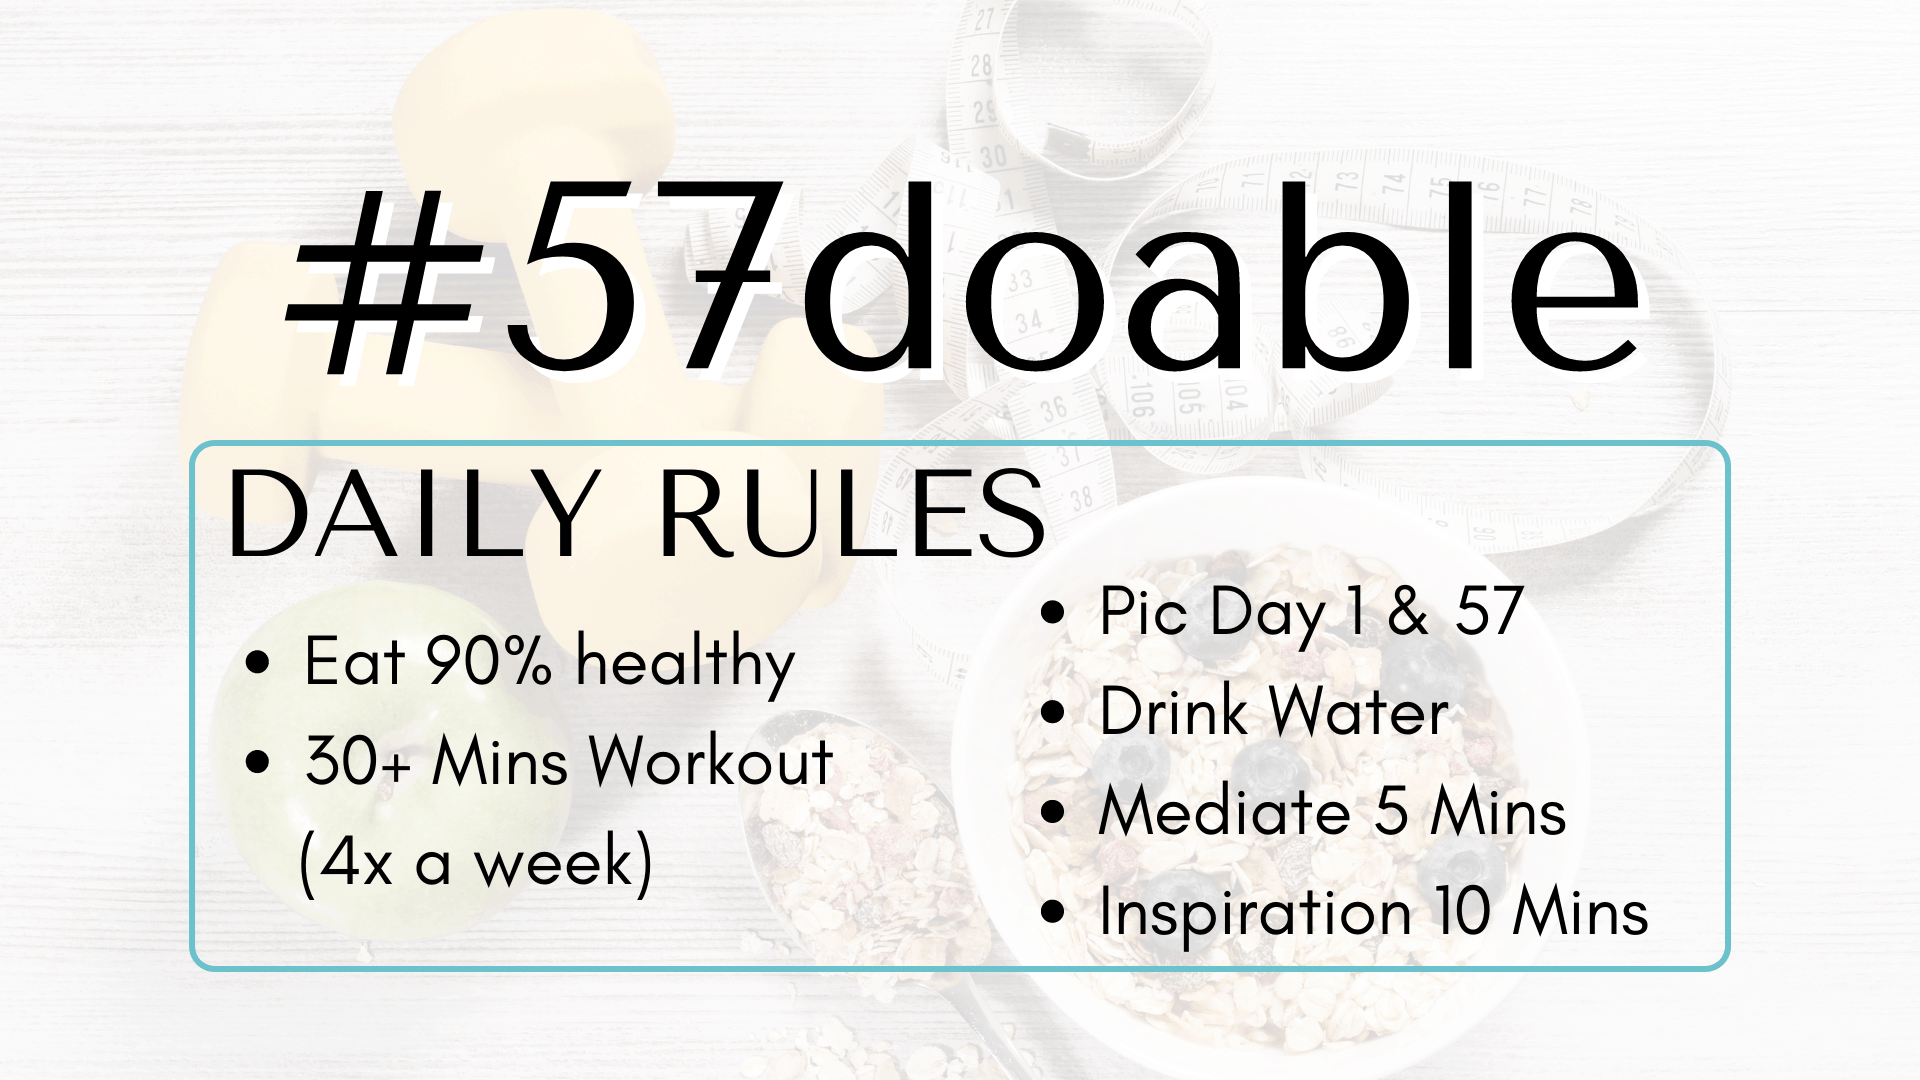 57Doable rules